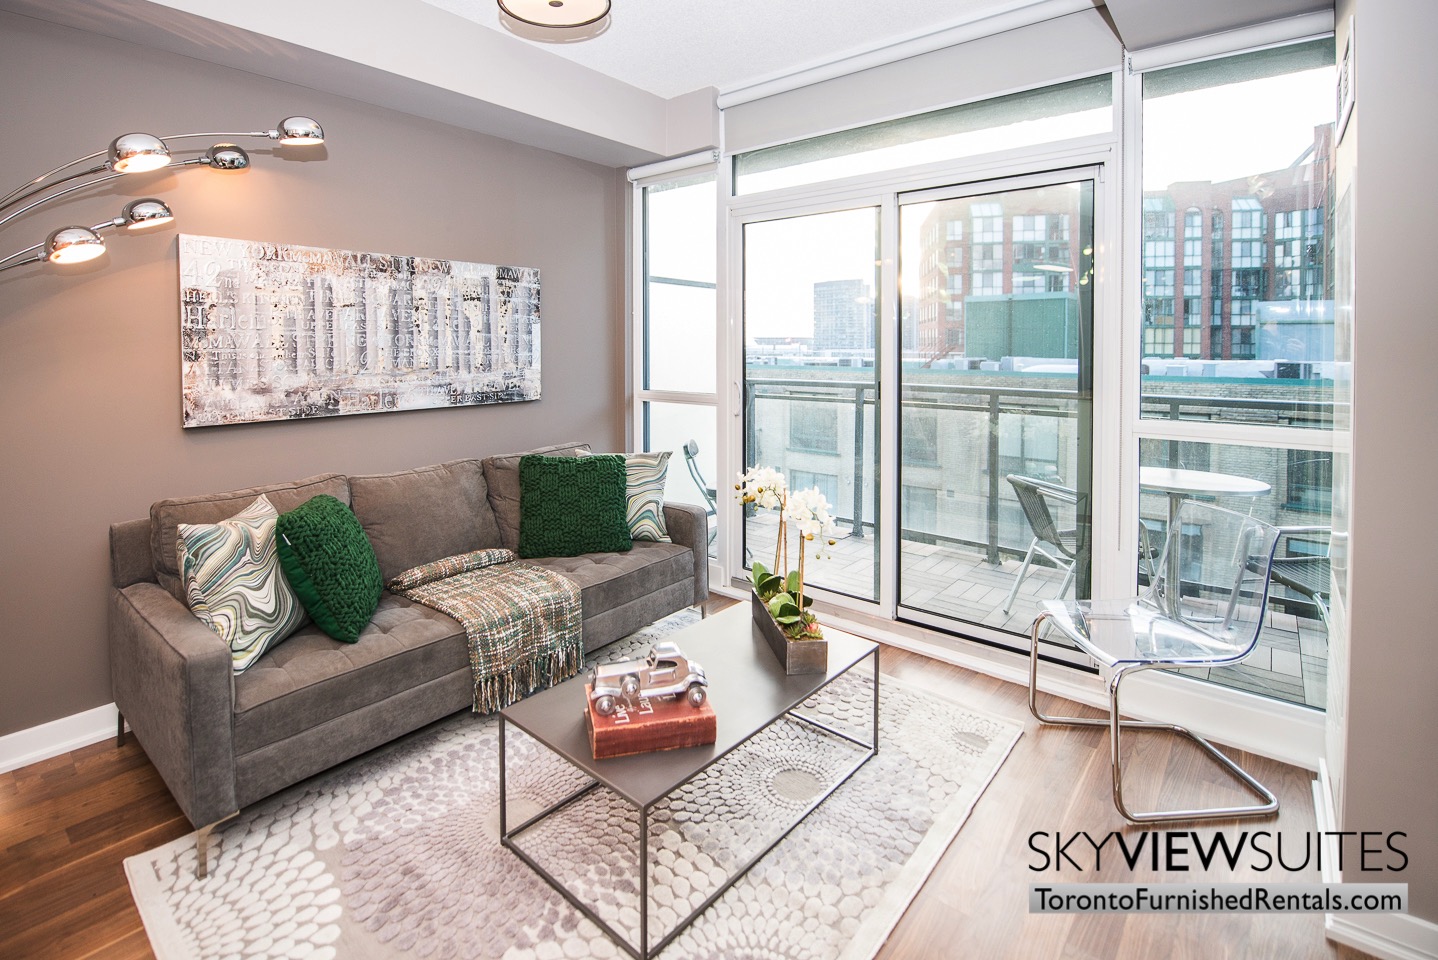 furnished-apartments-living-room-King-west